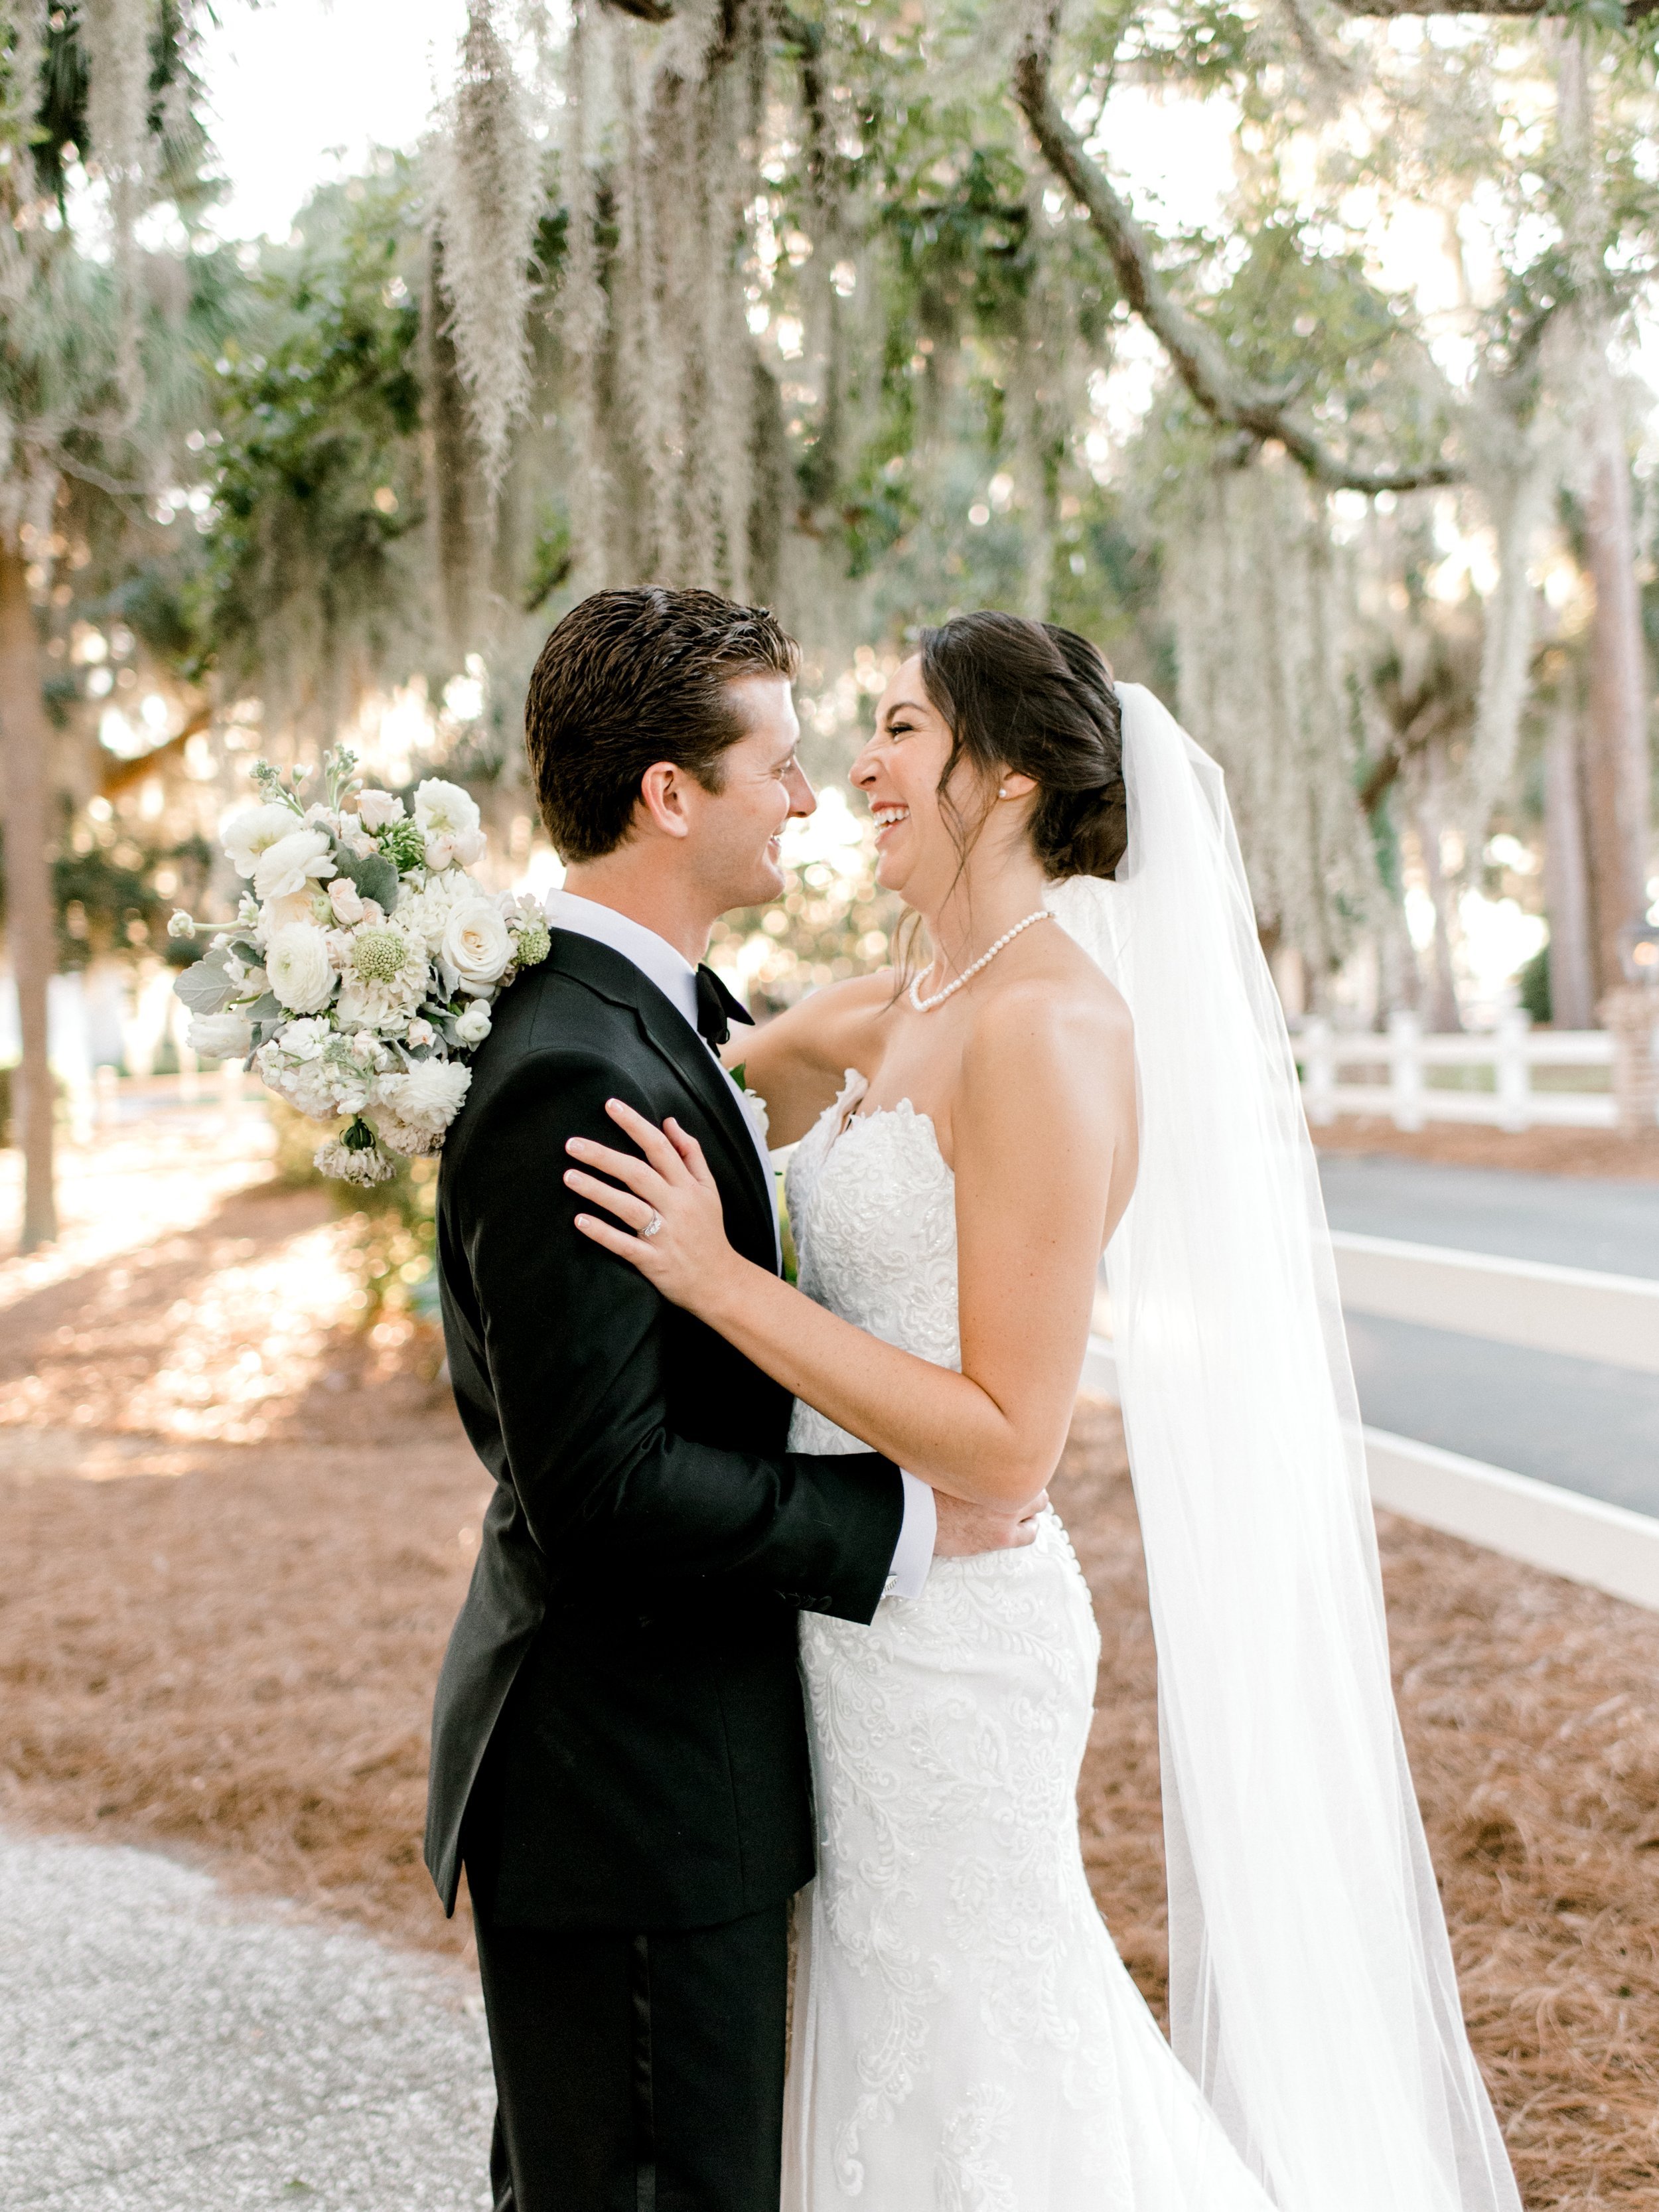 ivory-and-beau-blog-down-for-the-gown-grayson-real-bride-real-wedding-blog-southern-bride-maggie-sottero-wedding-dress-bridal-gown-wedding-gown-bridal-shop-bridal-boutique-savannah-georgia-Pinyan_0845.jpg